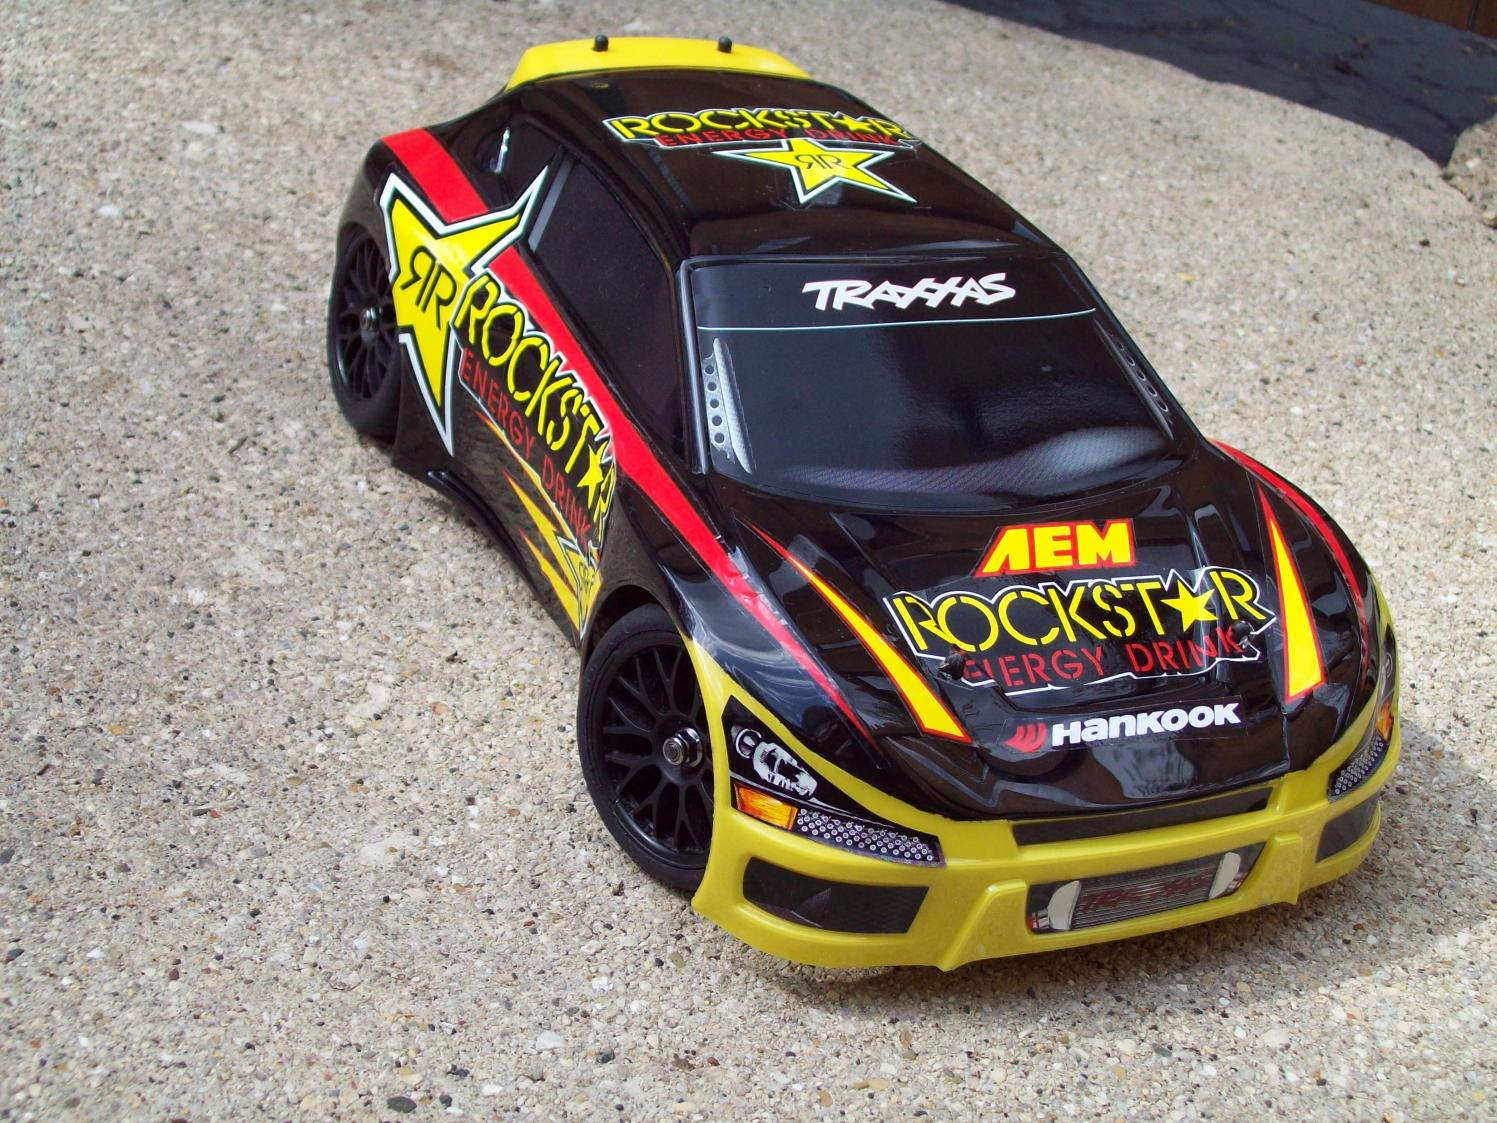 TRAXXAS ALL NEW 1/16 RALLY CAR - Page 18 - R/C Tech Forums